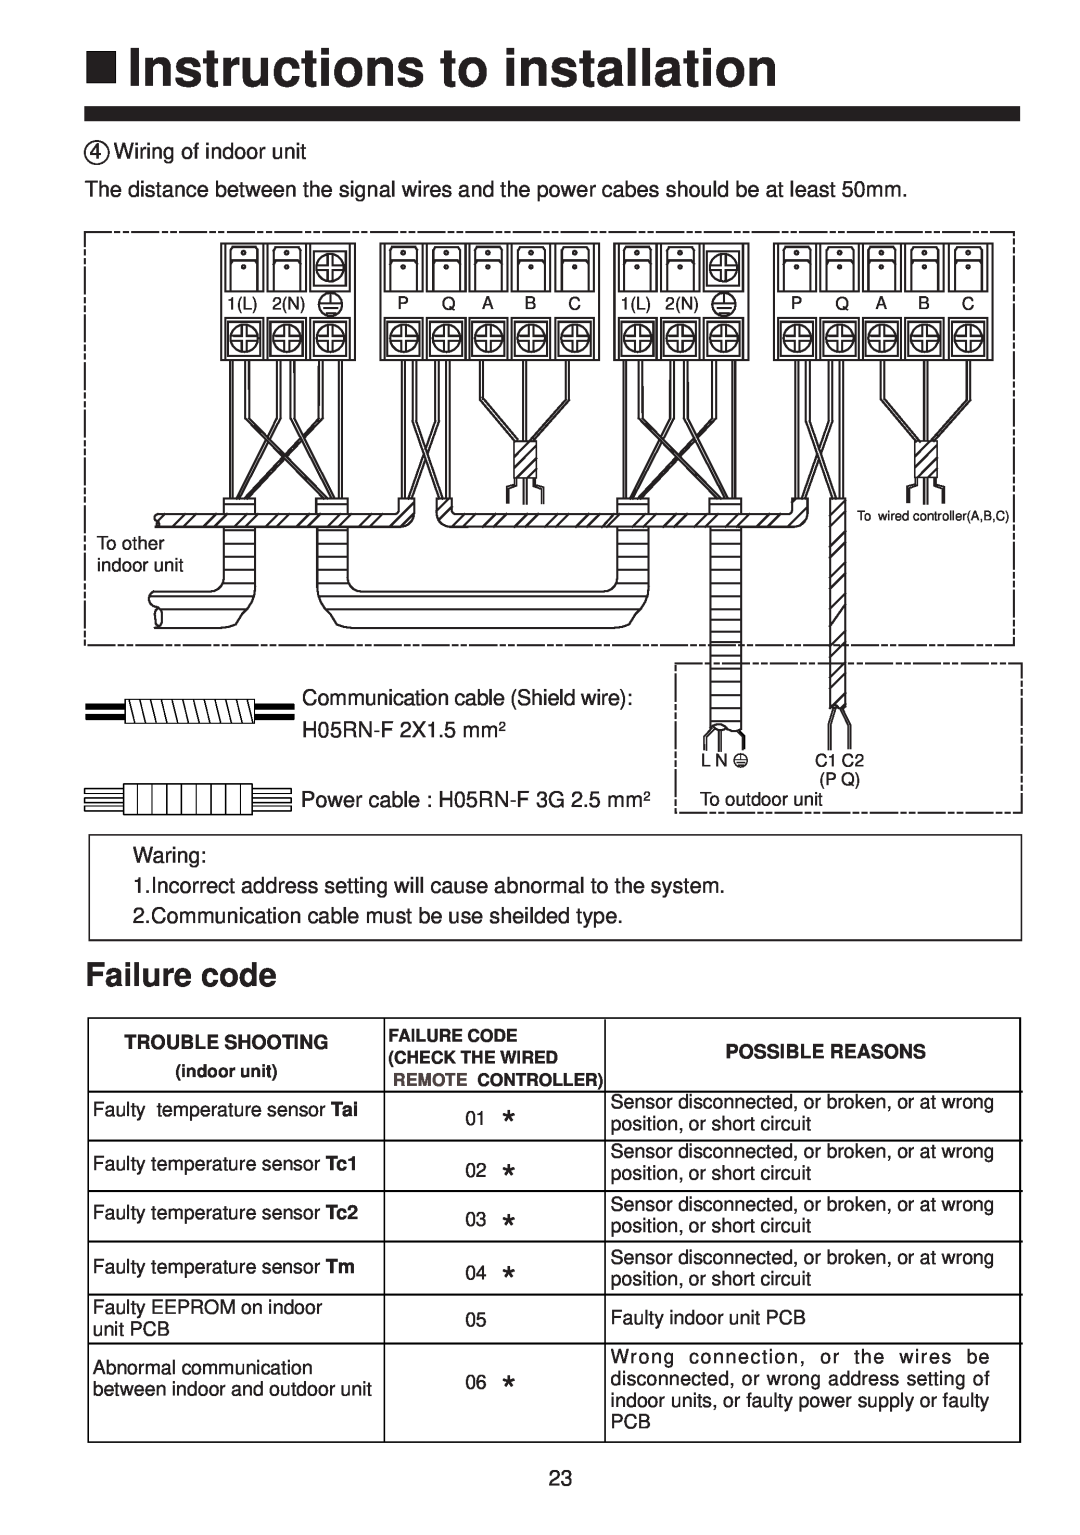 Haier AD142XLERA Failure code, Instructions to installation, Wiring of indoor unit, Power cable H05RN-F3G 2.5 mm2, Waring 